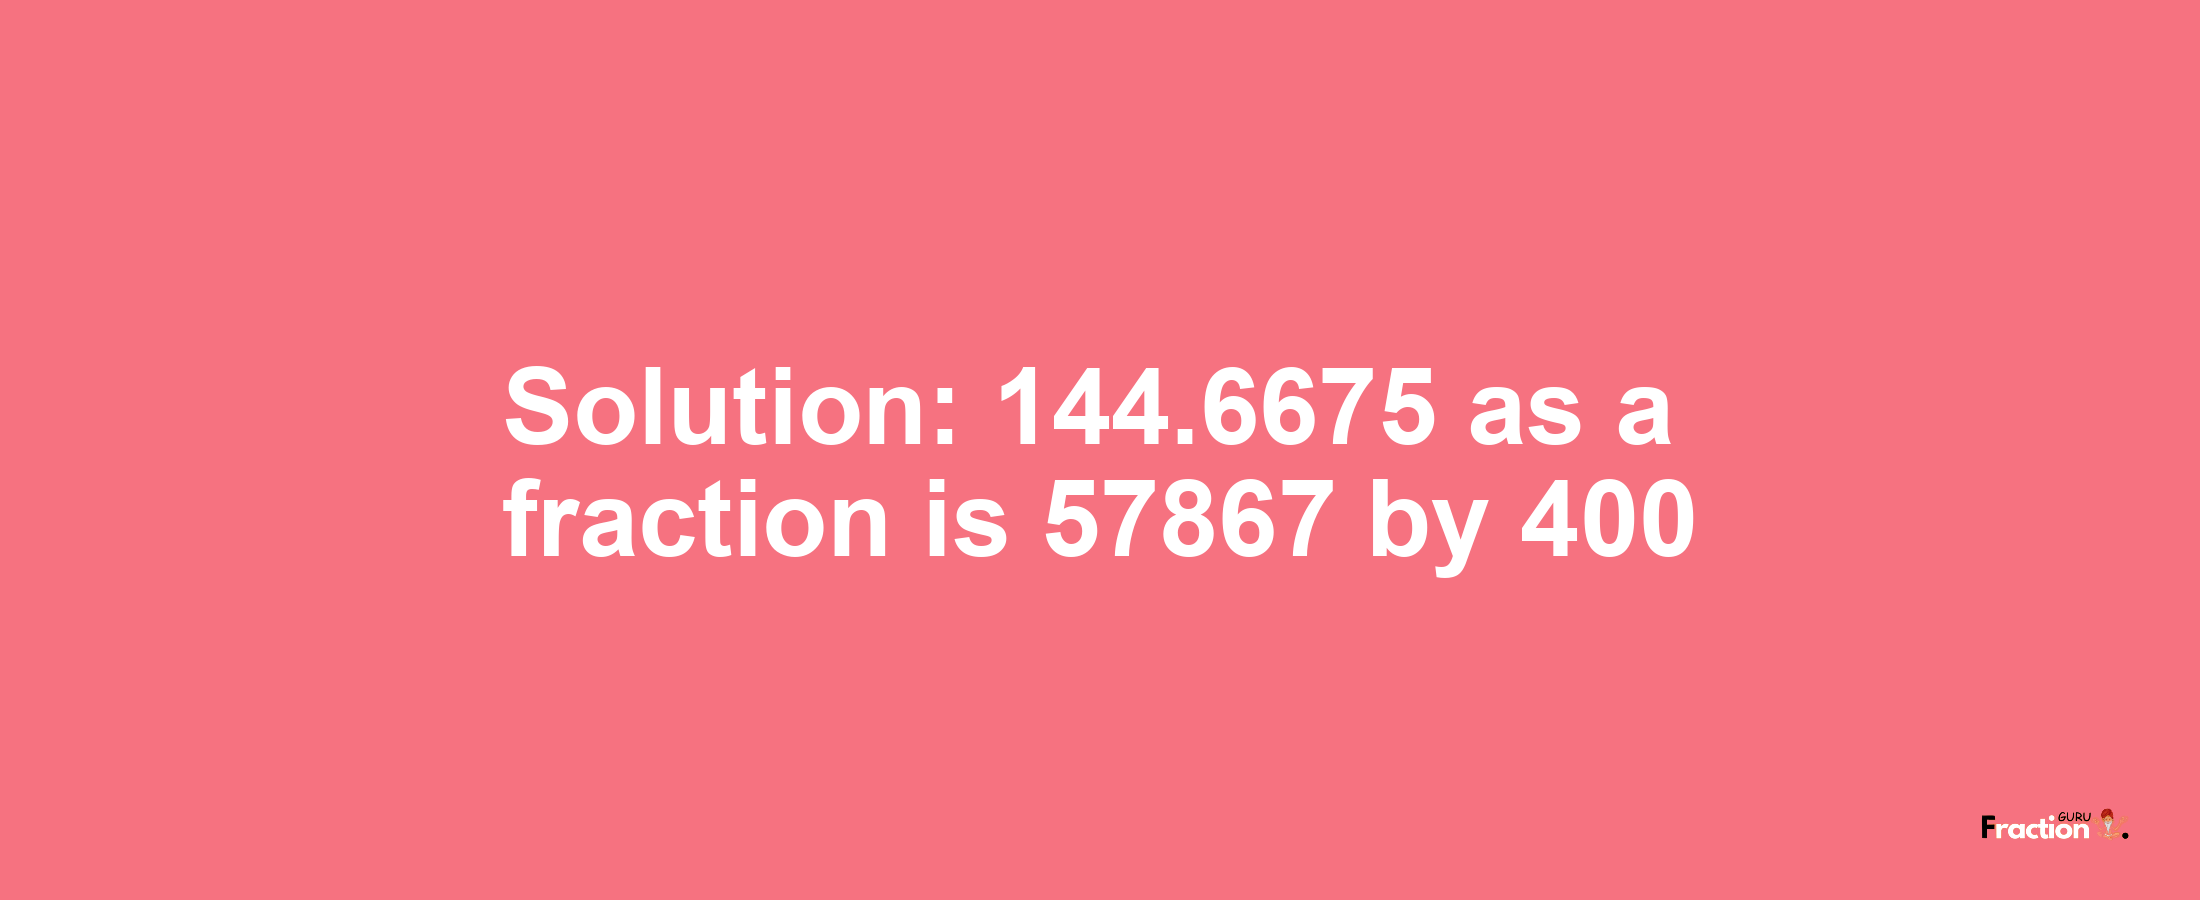 Solution:144.6675 as a fraction is 57867/400